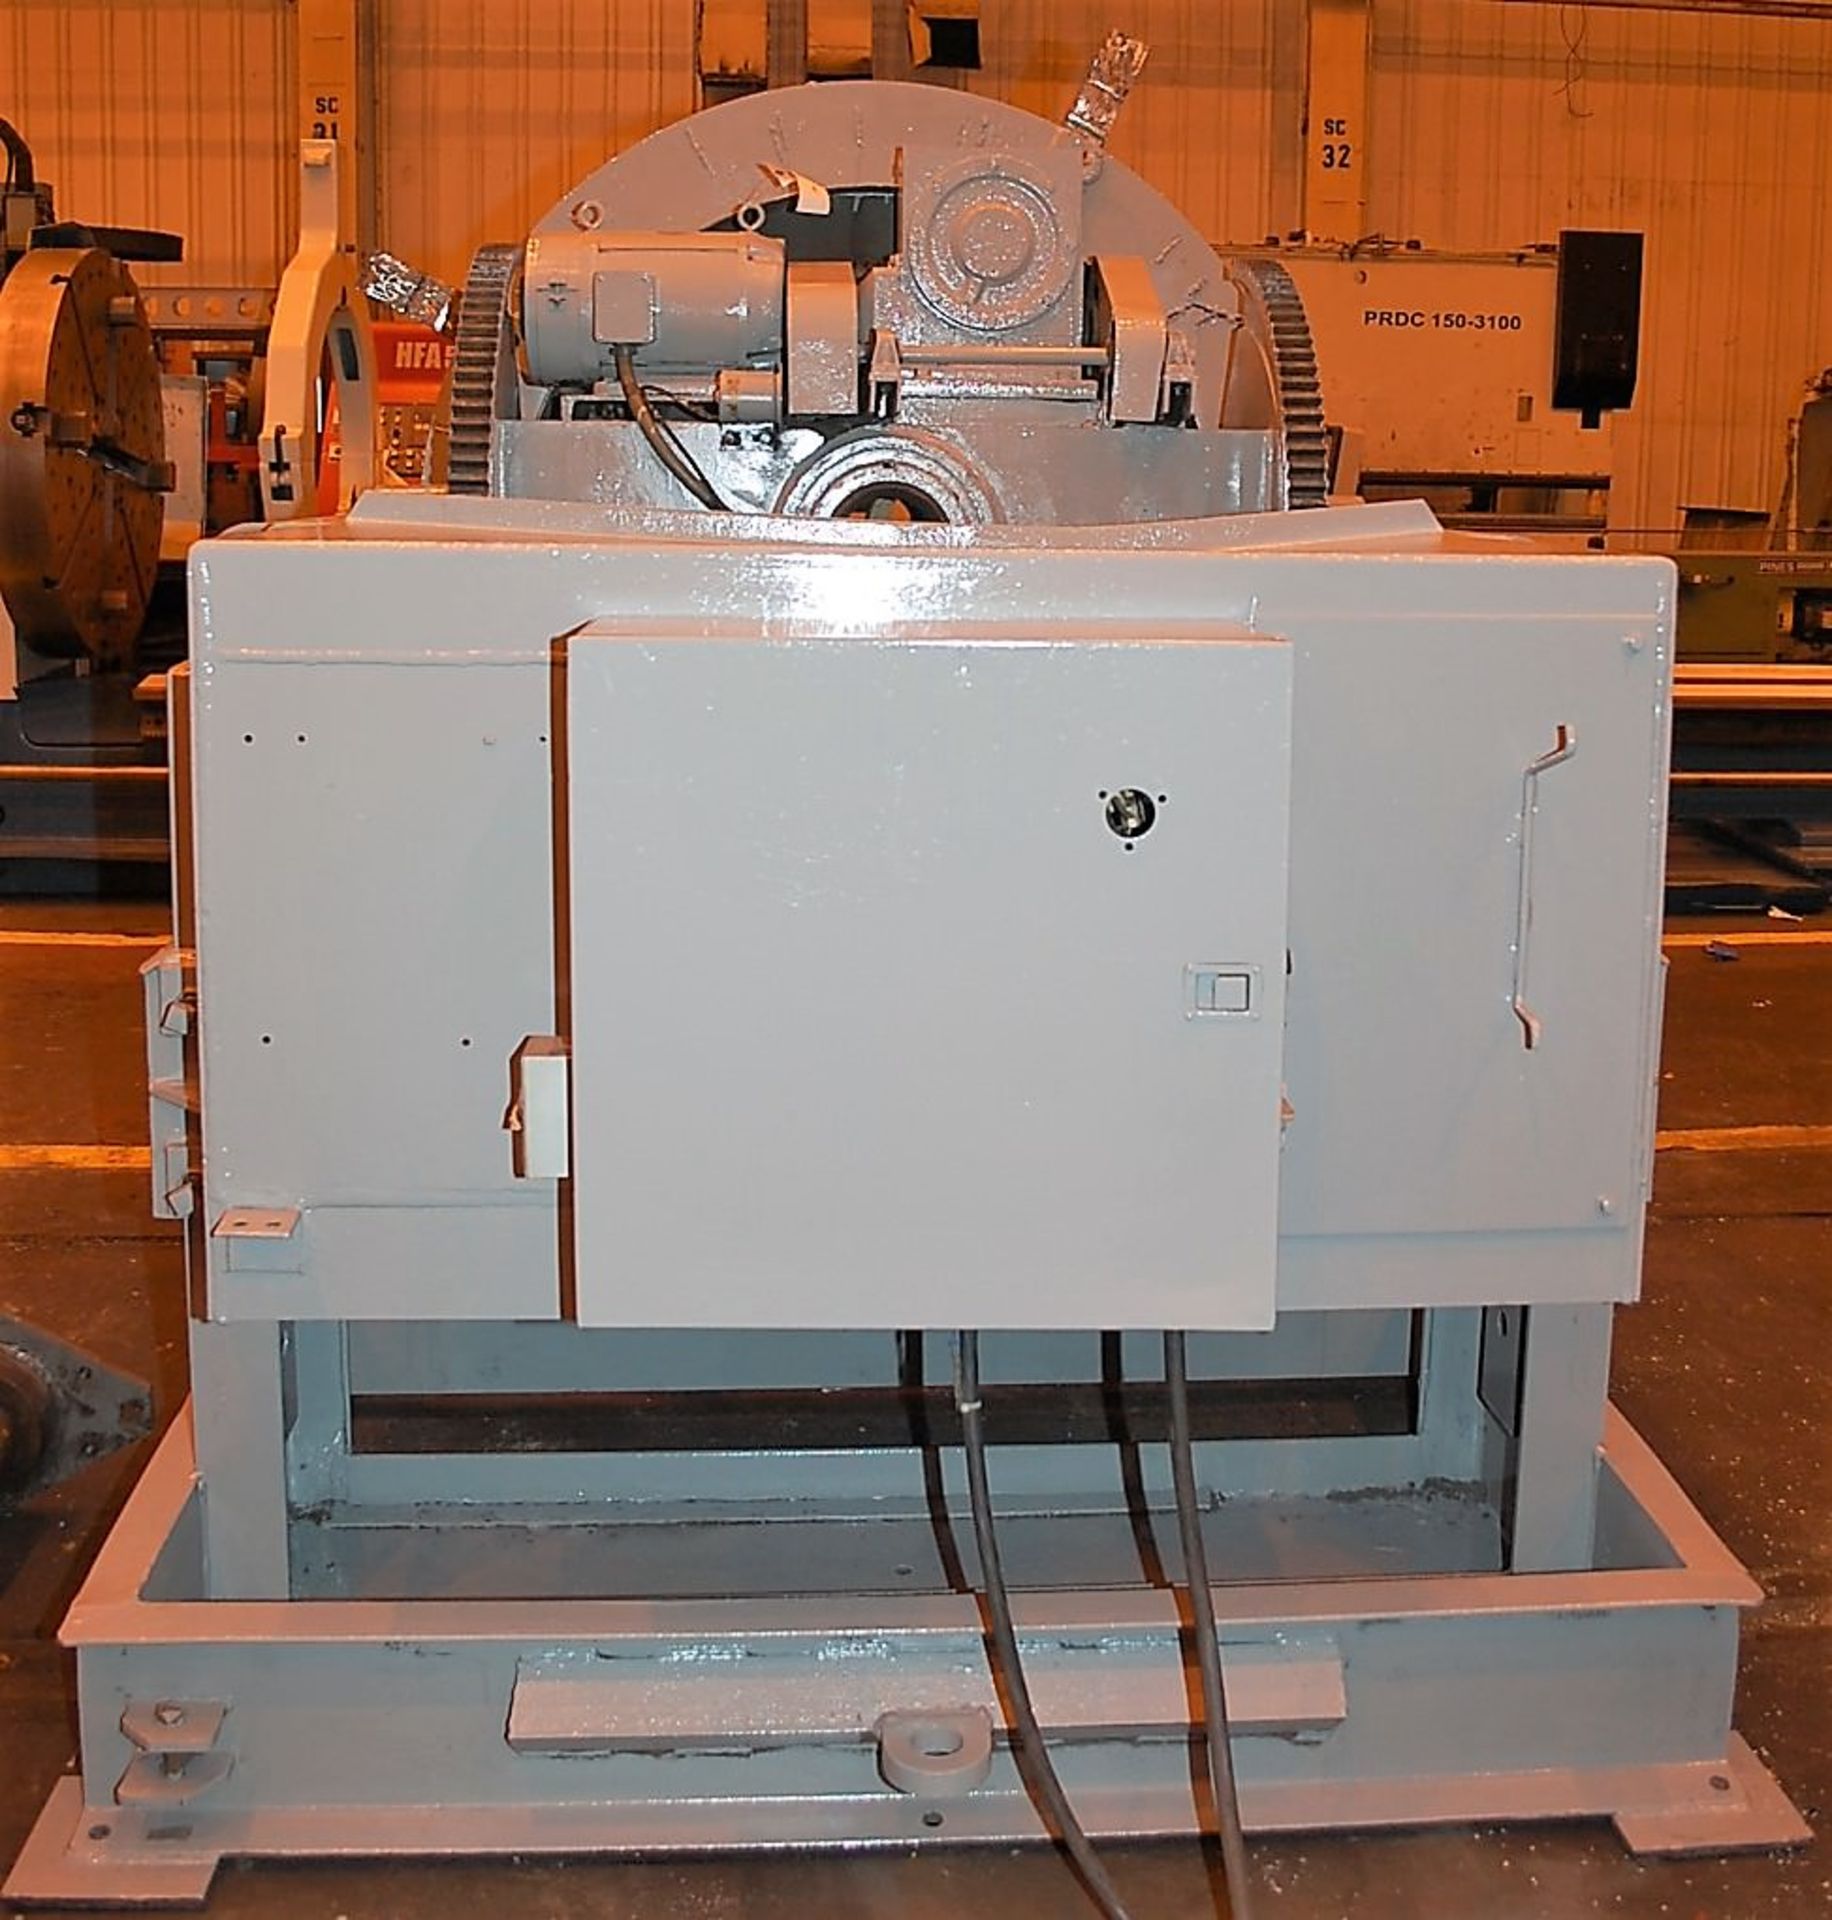 Ransome 100P 10,000 Lb. Welding Positioner - Image 5 of 6